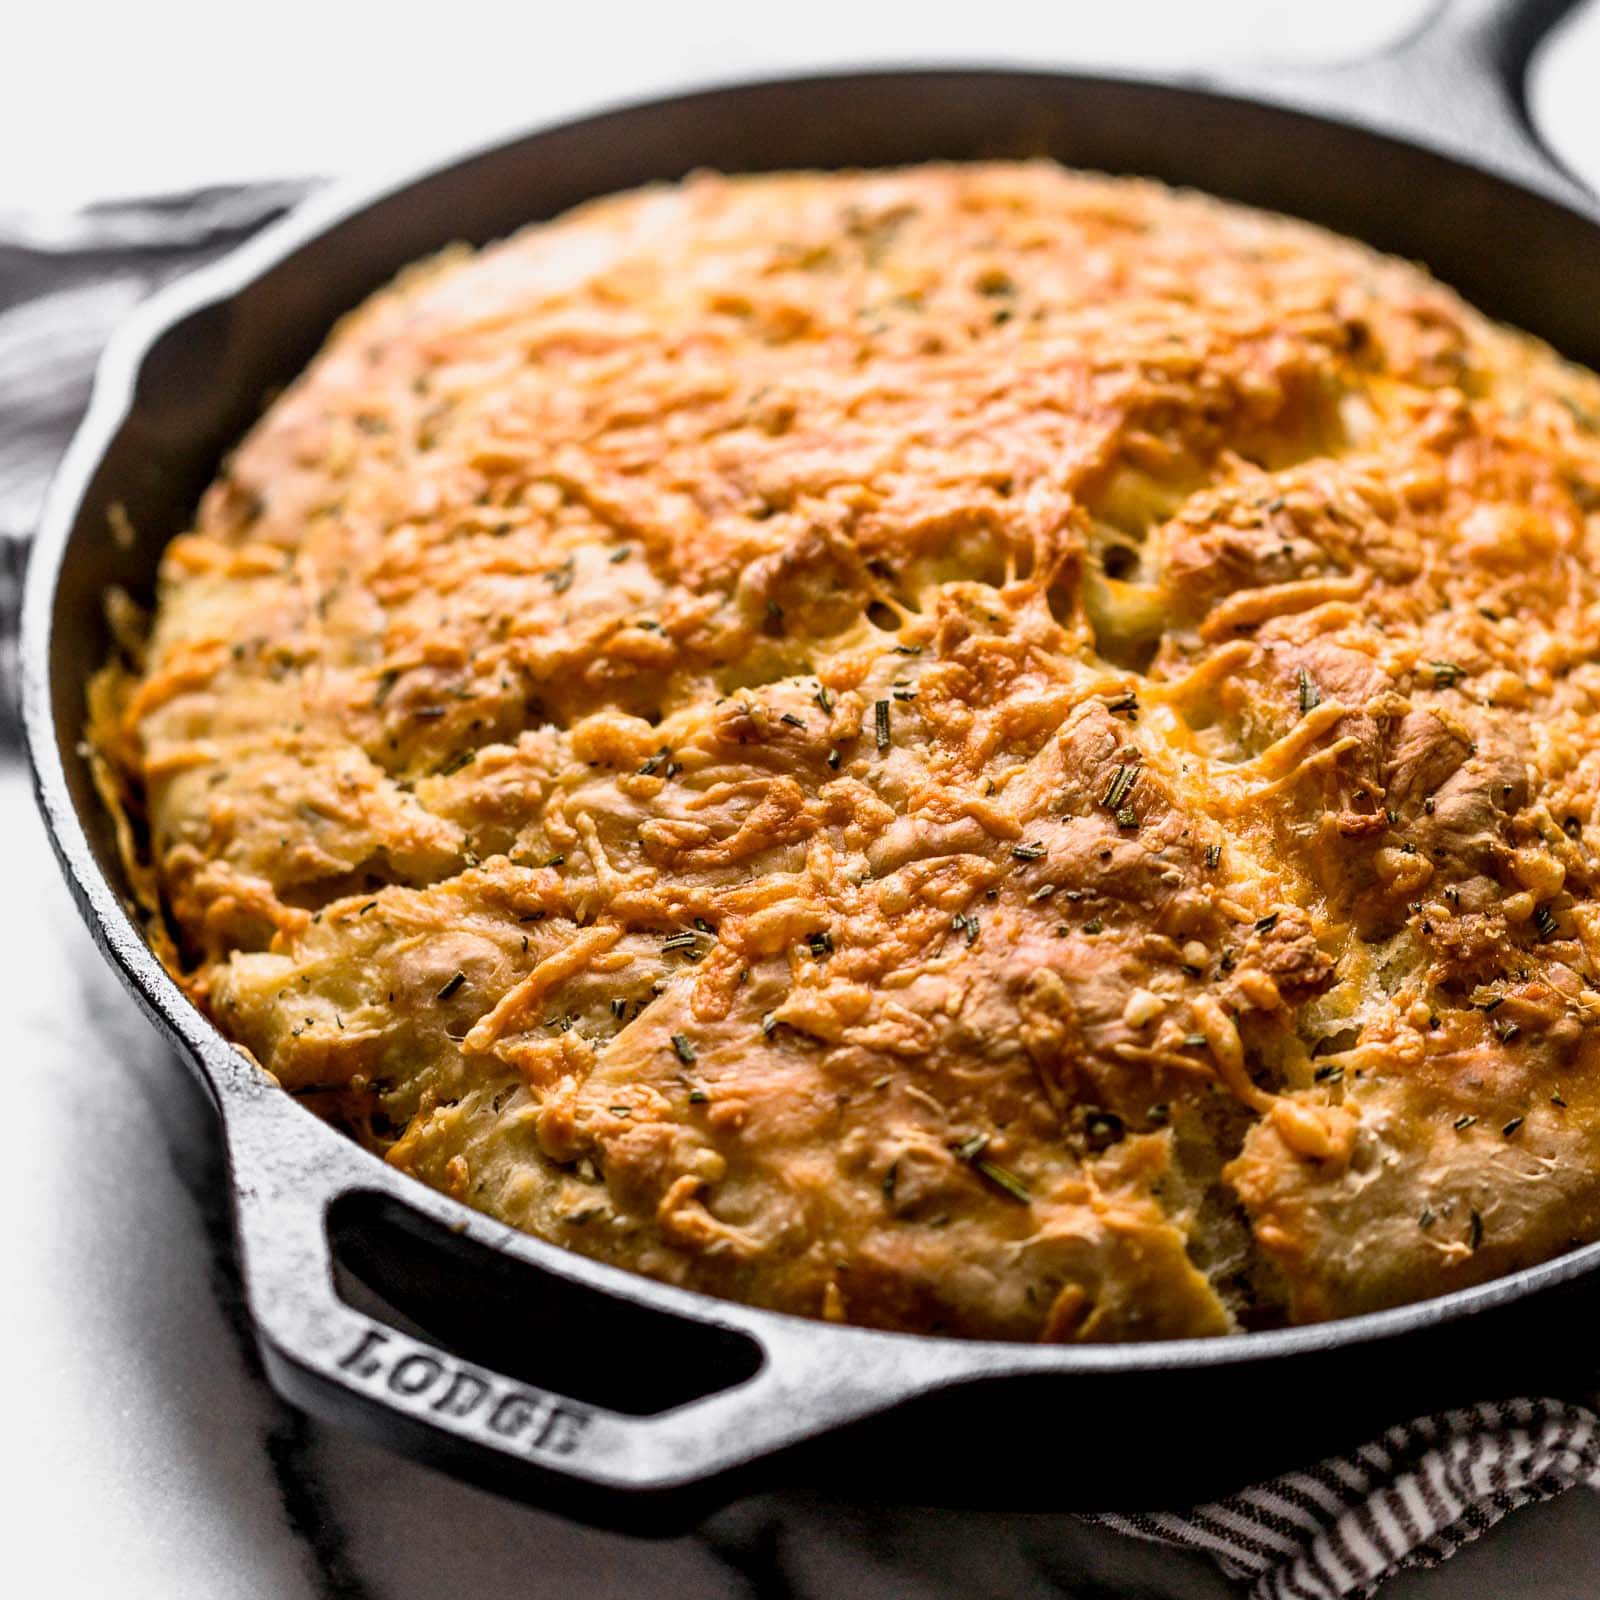 No Knead Rosemary Parmesan Skillet Bread features a super easy homemade dough that comes together in a matter of minutes! This bread has tons of flavor and a crispy cheesy crust.